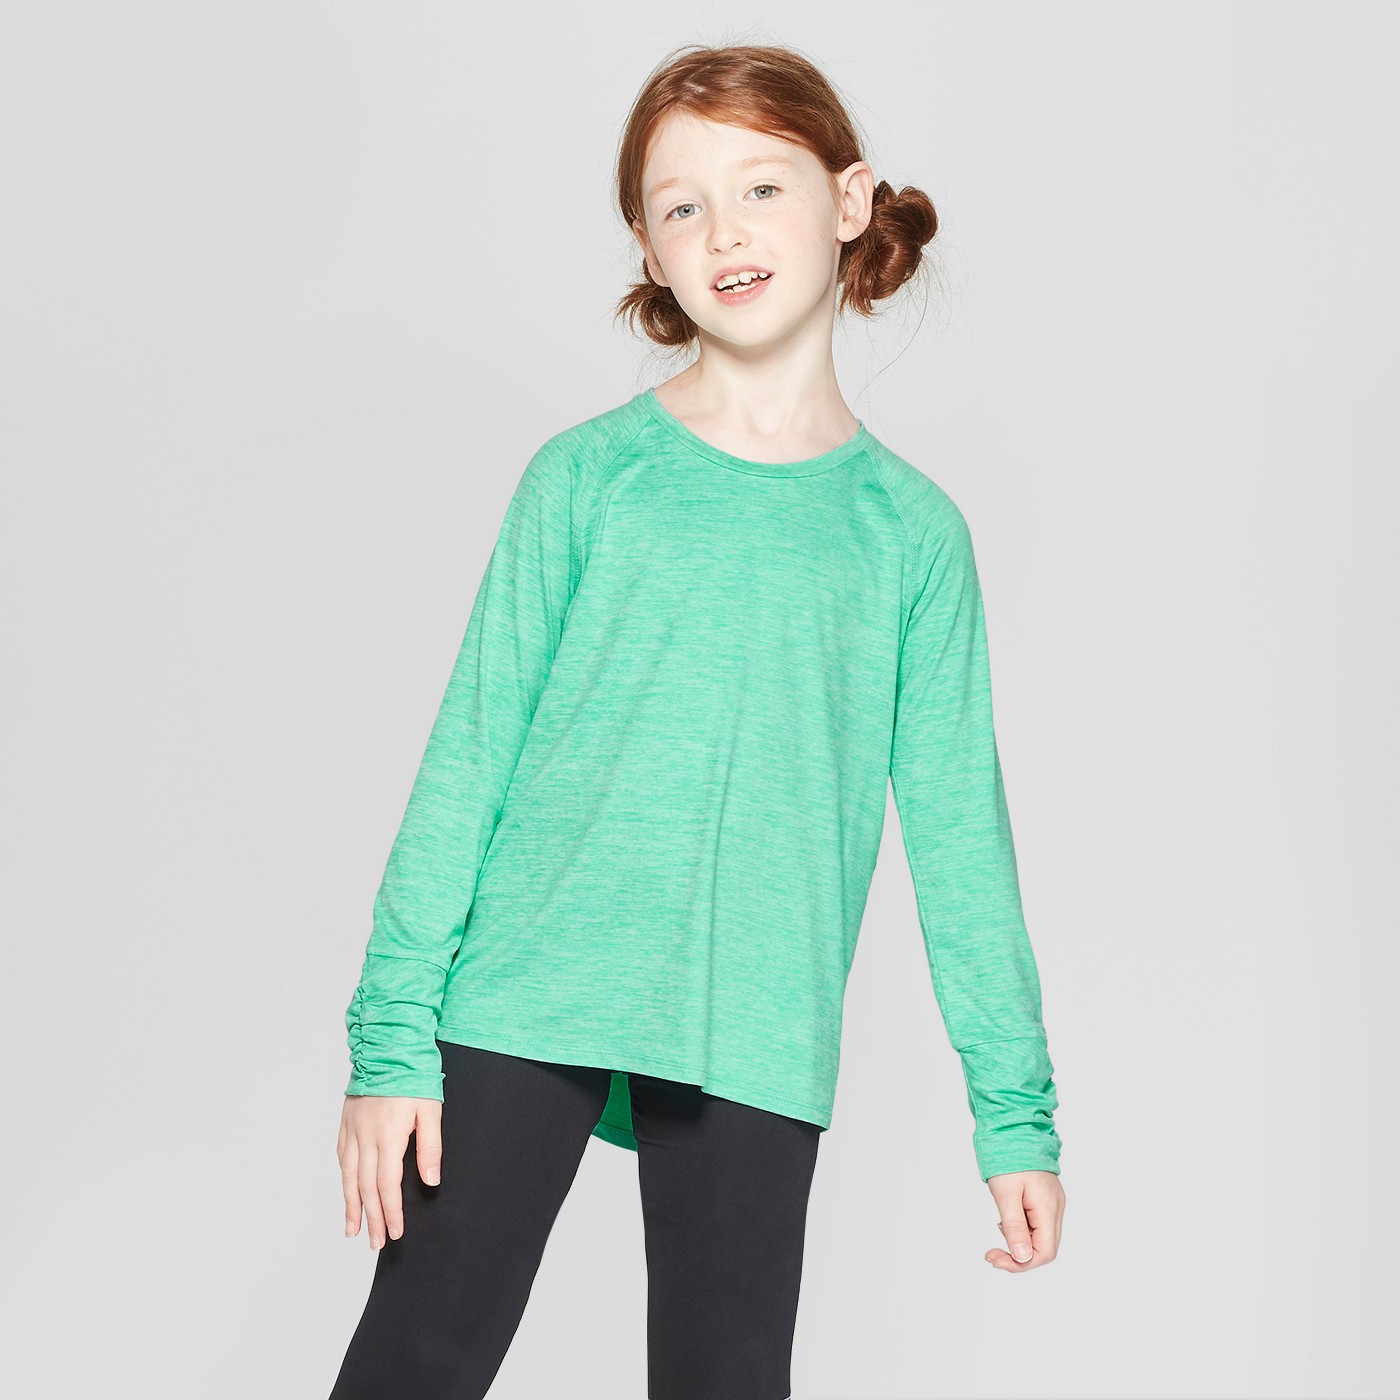 Girls' Ruched Super Soft Long Sleeve T-Shirt - C9 ChampionÂ® - image 1 of 3